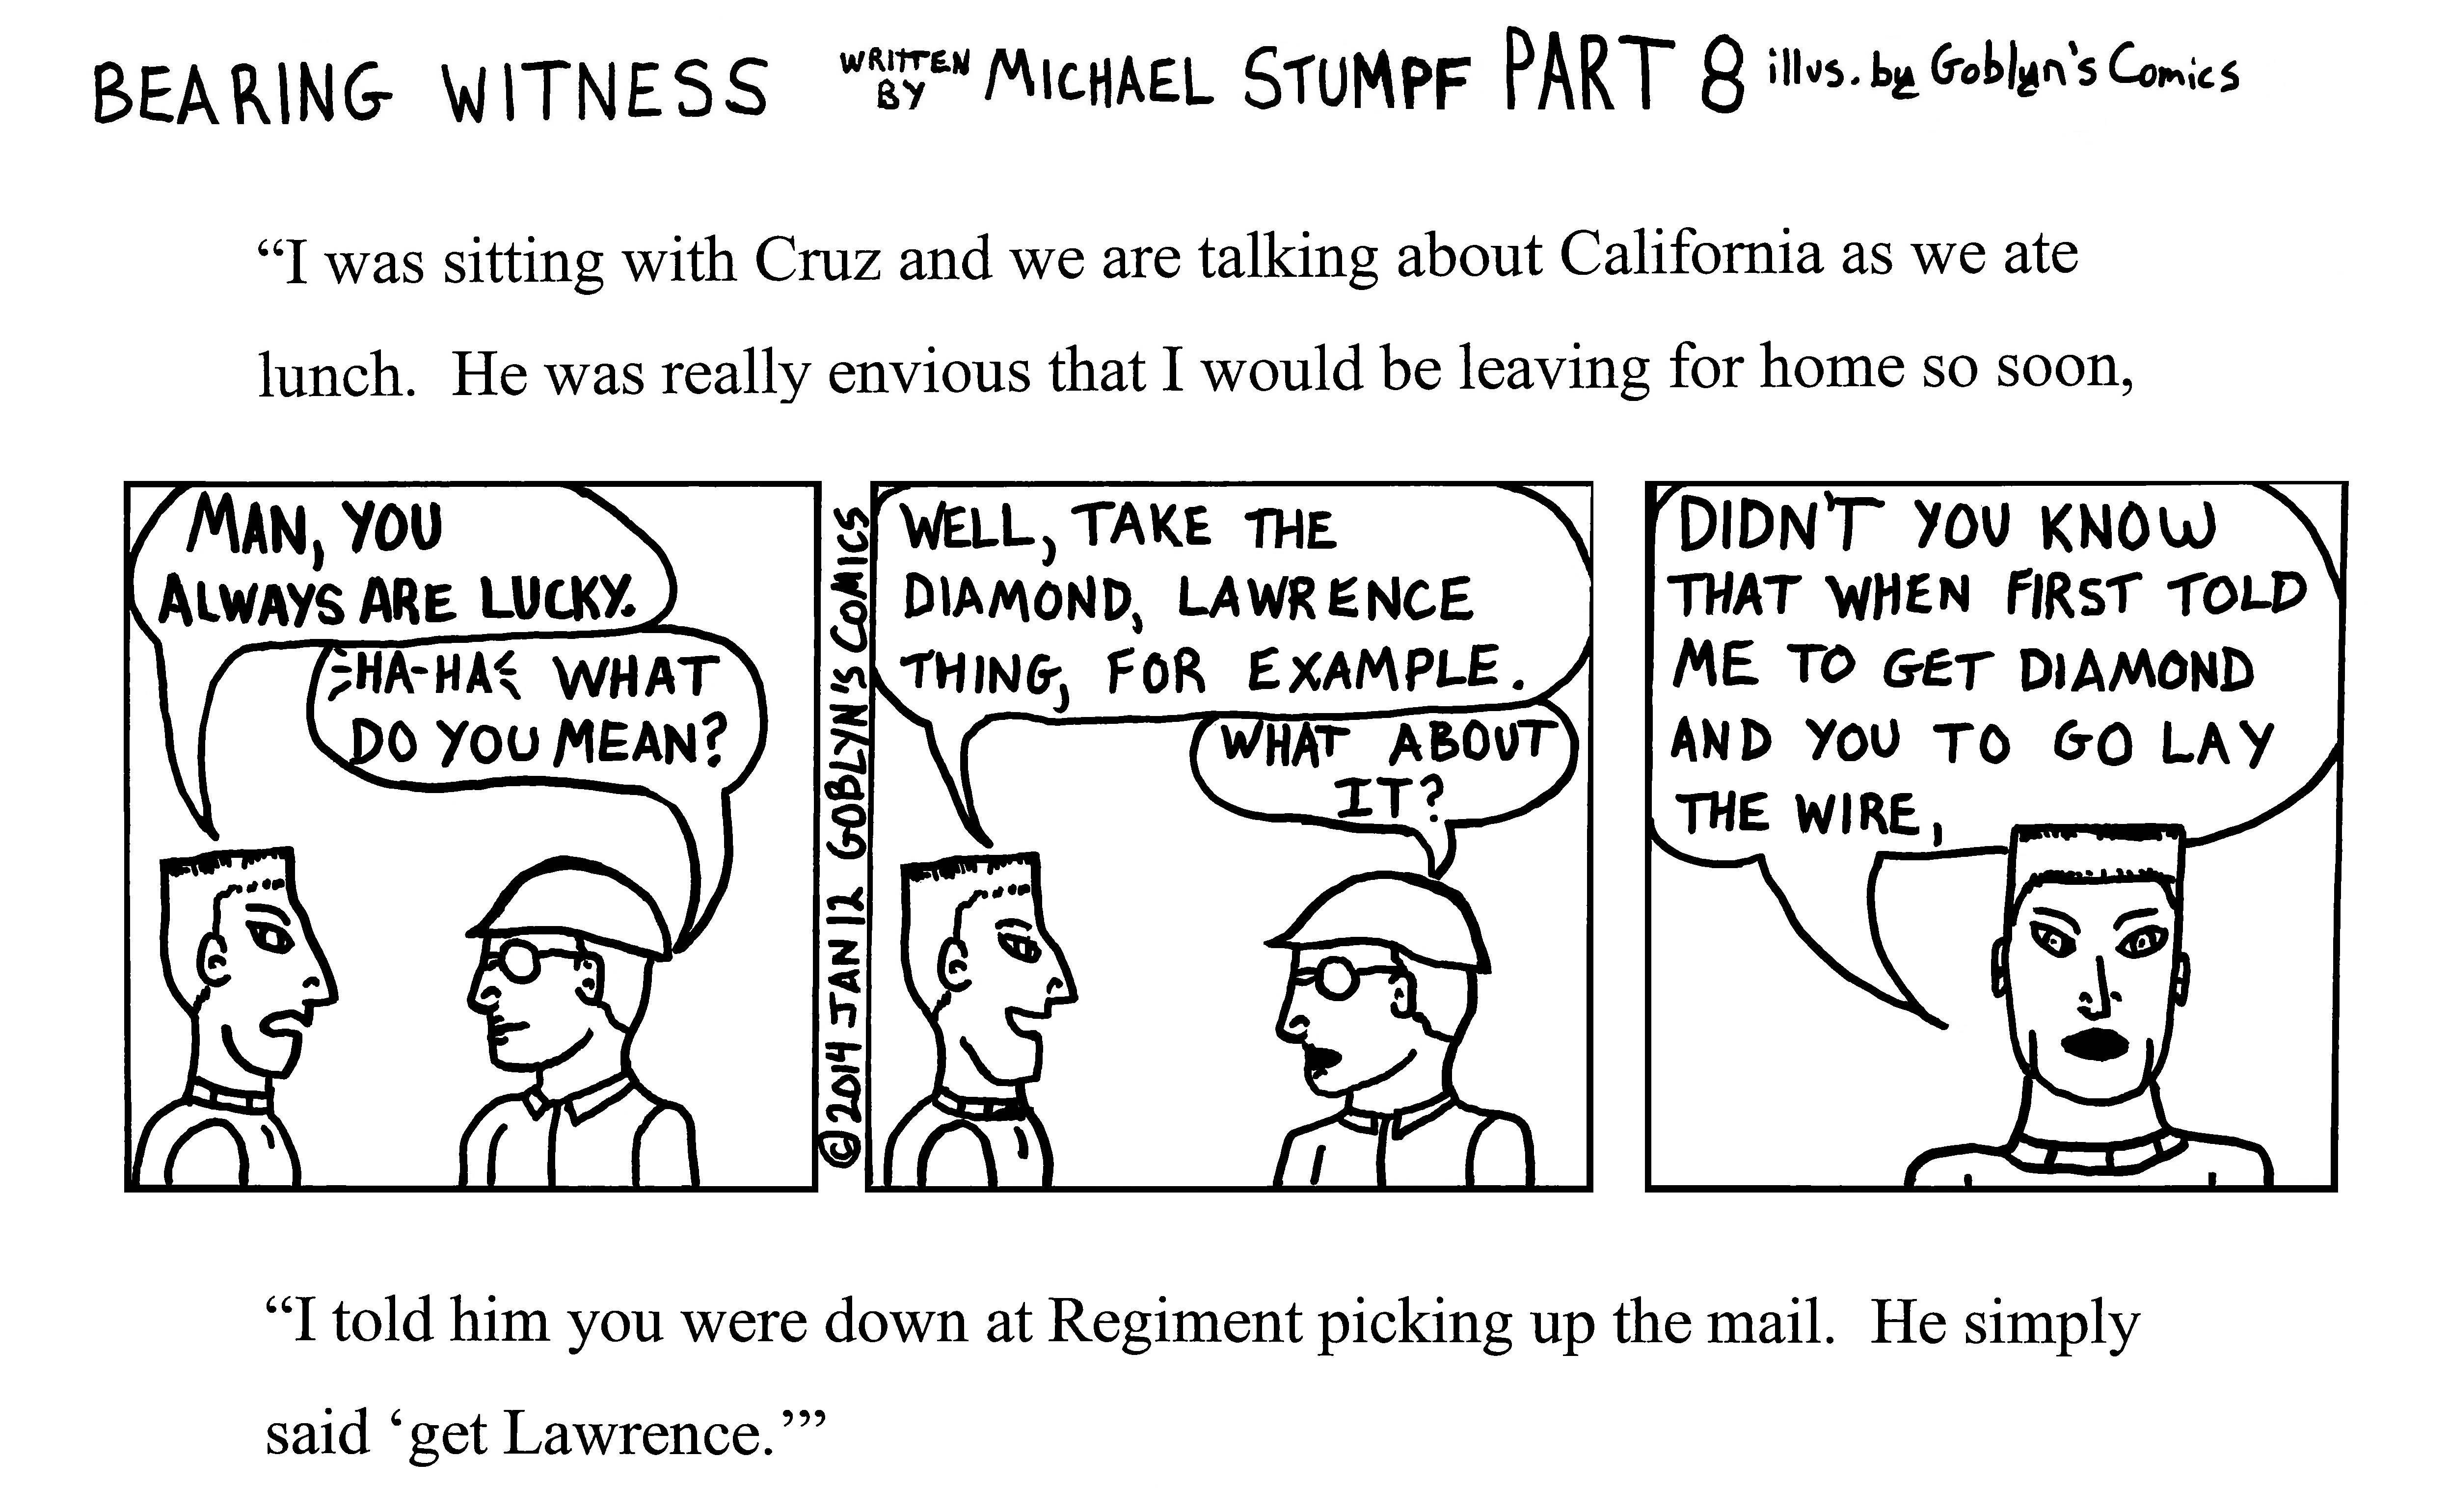 Bearing Witness written by Michael Stumpf, illustrated by Goblyns' Comics